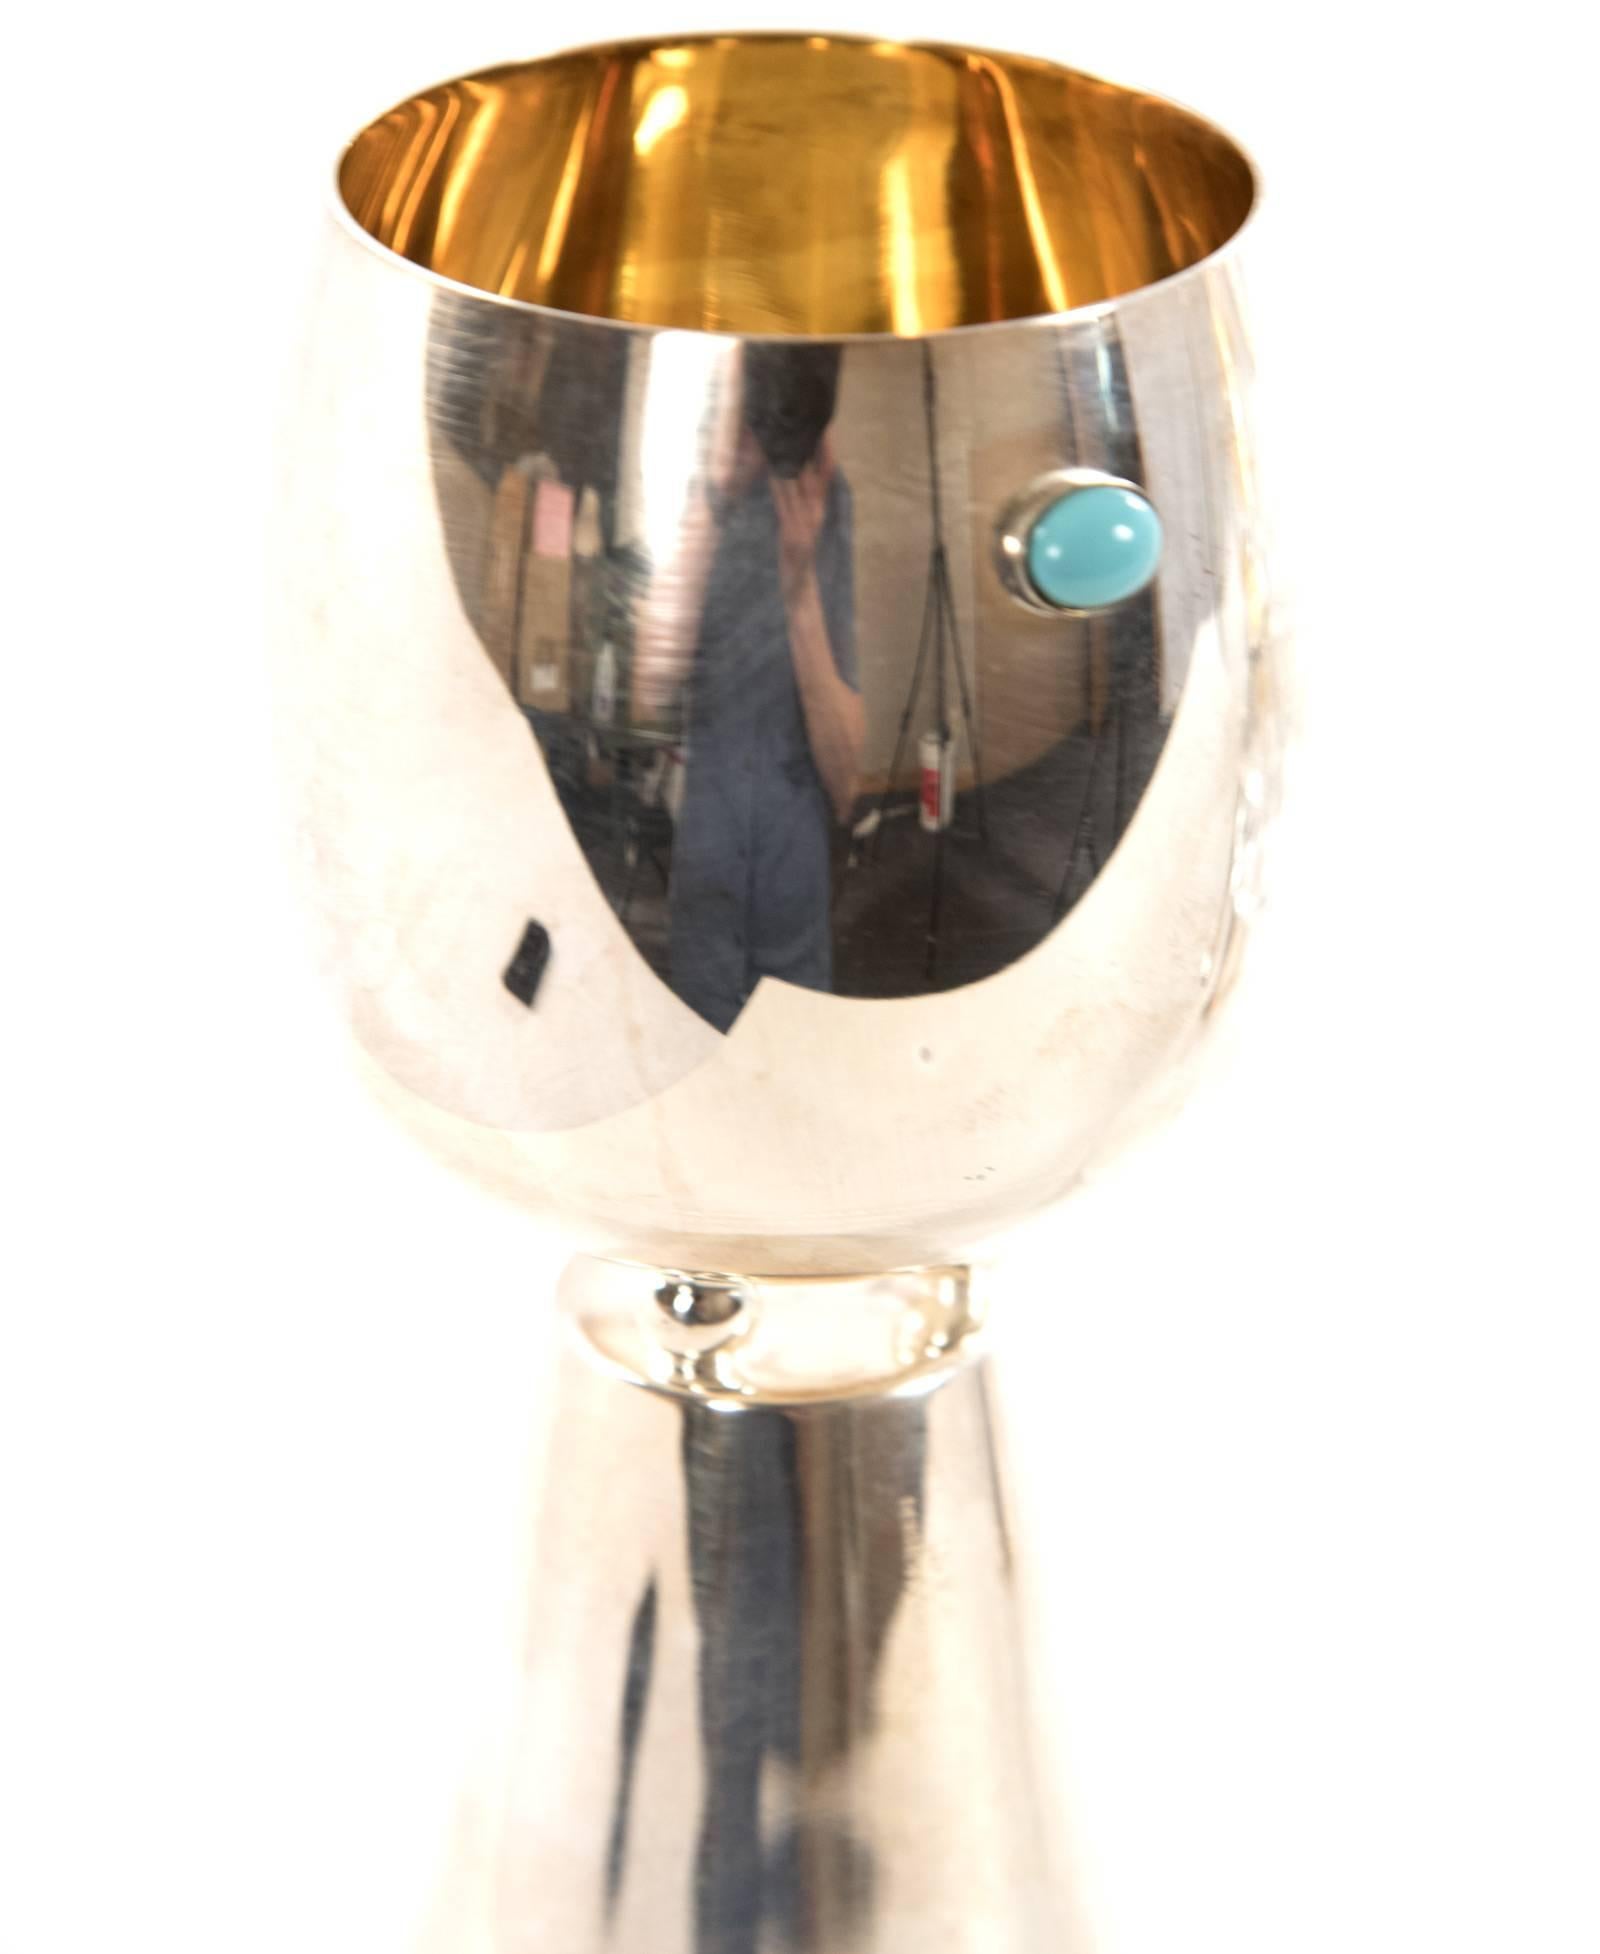 A set of six Serego Alighieri Masi wine goblets formed from pewter and glass, the two materials combined to create a nontraditional service set. The globular forms, decorated with a mix of inset colored stones and relief forms accented with gold